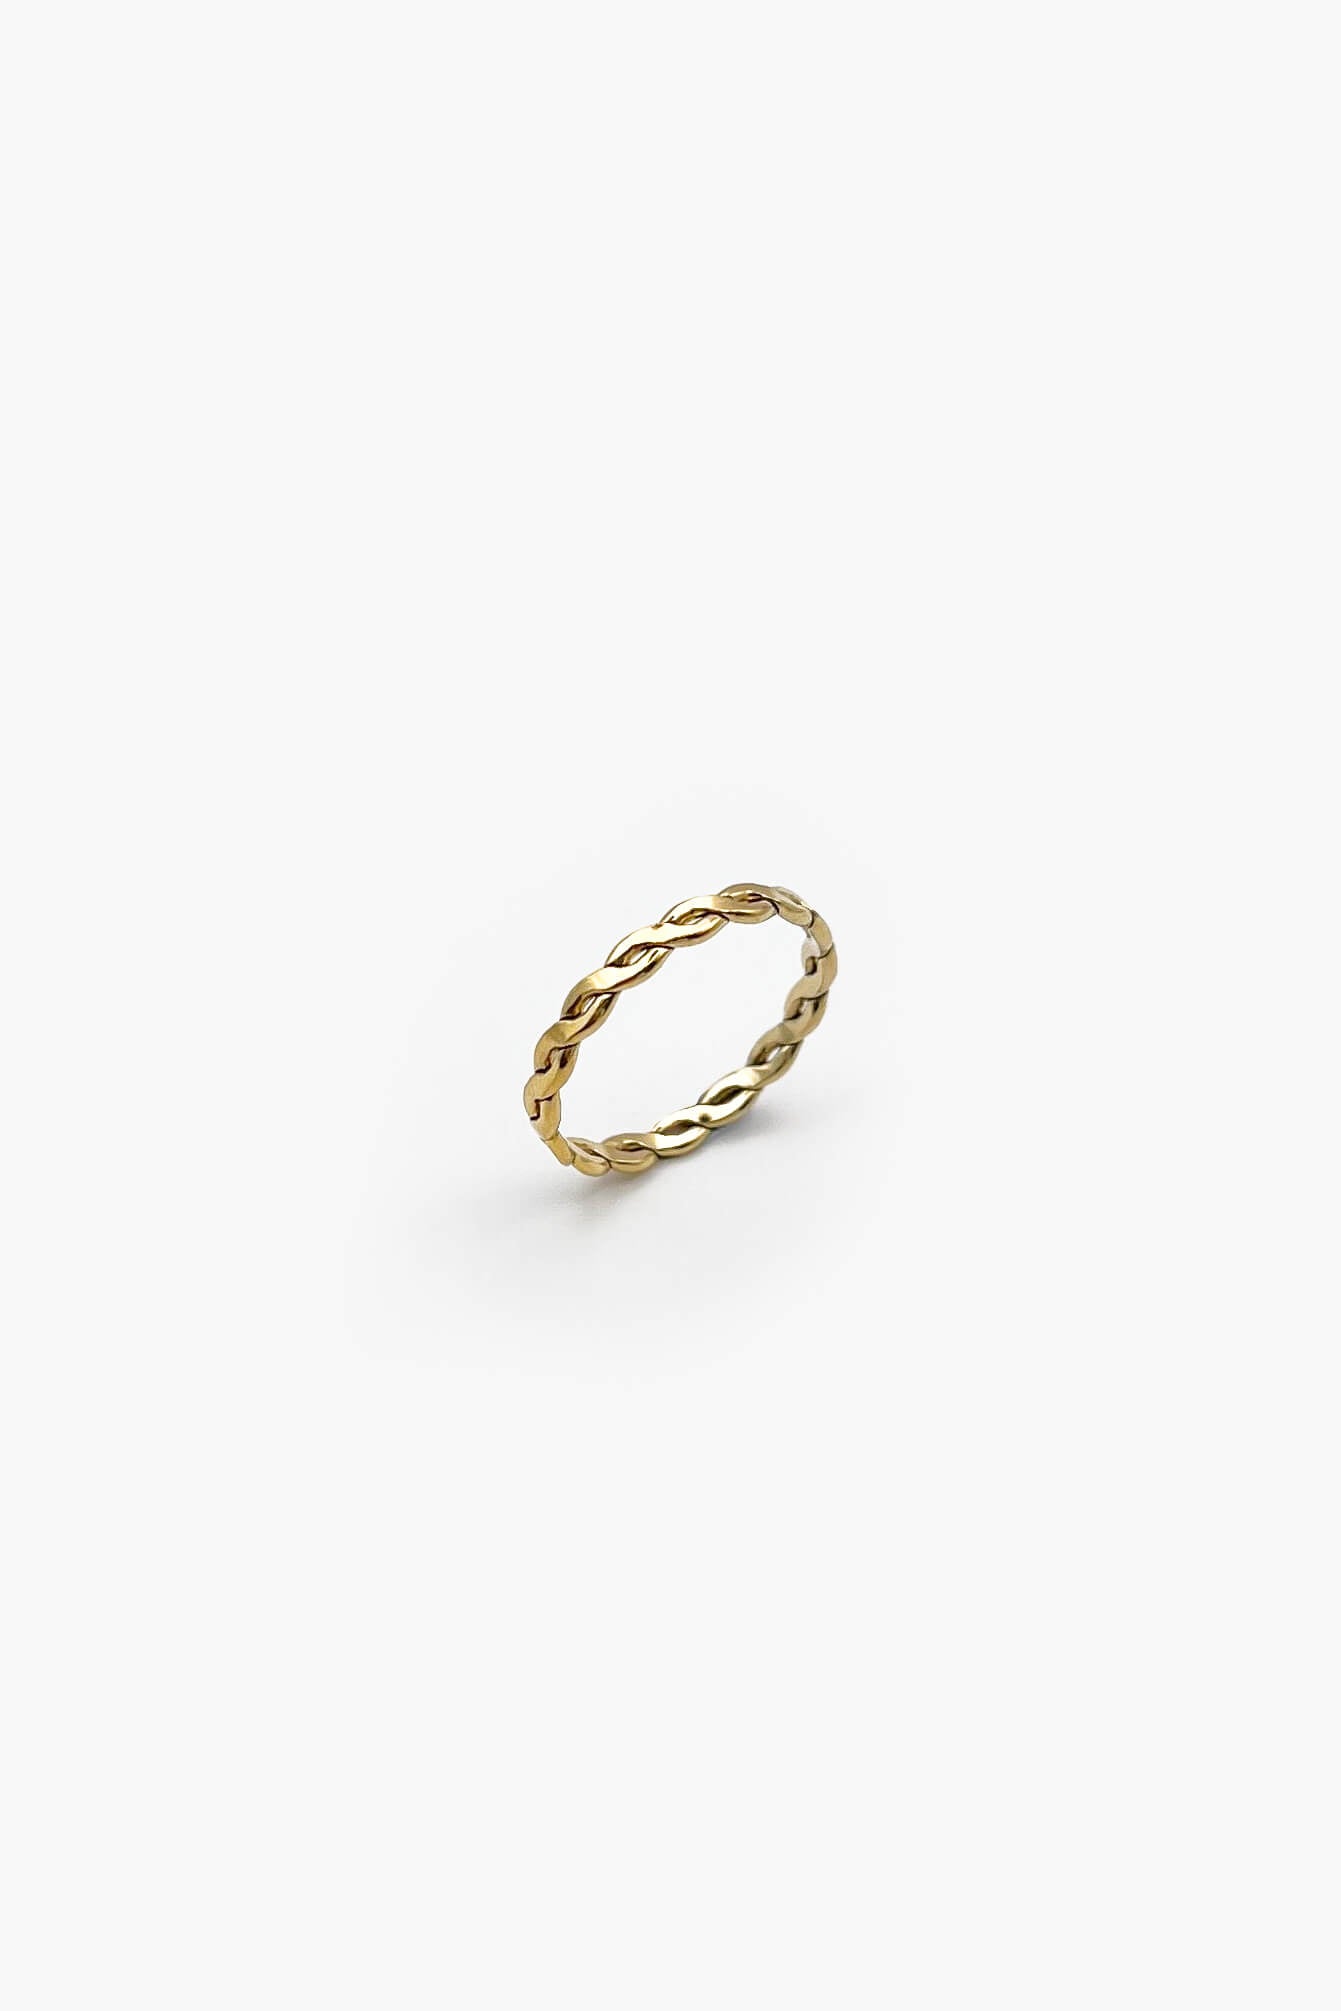 Hammered Gold Fill Stacking Ring - Set of 3 – Aquarian Thoughts Jewelry